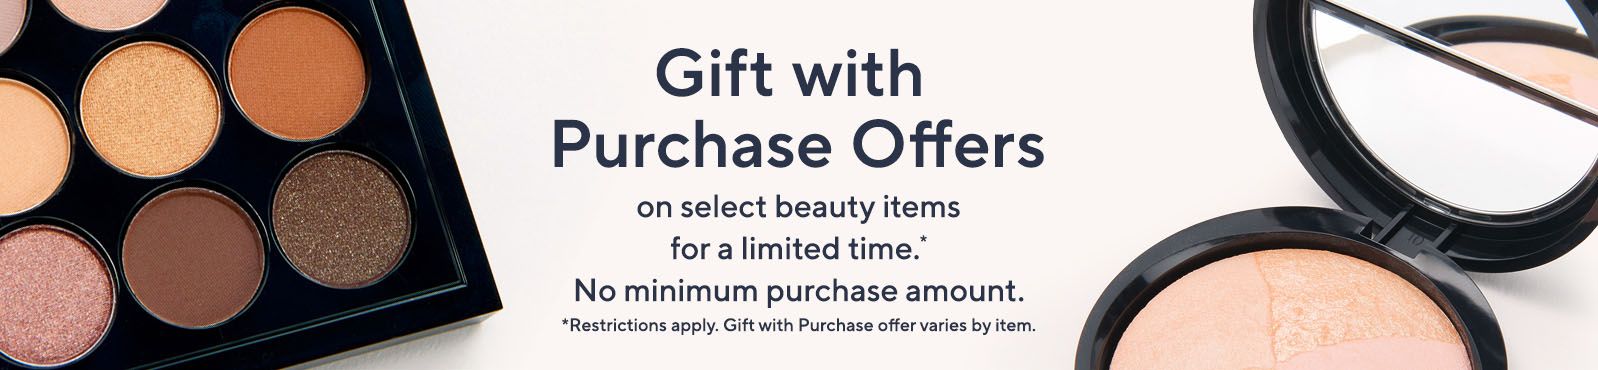 Gift with Purchase Offers on select beauty items for a limited time.* No minimum purchase amount.  *Restrictions apply. Gift with purchase offer varies by item.